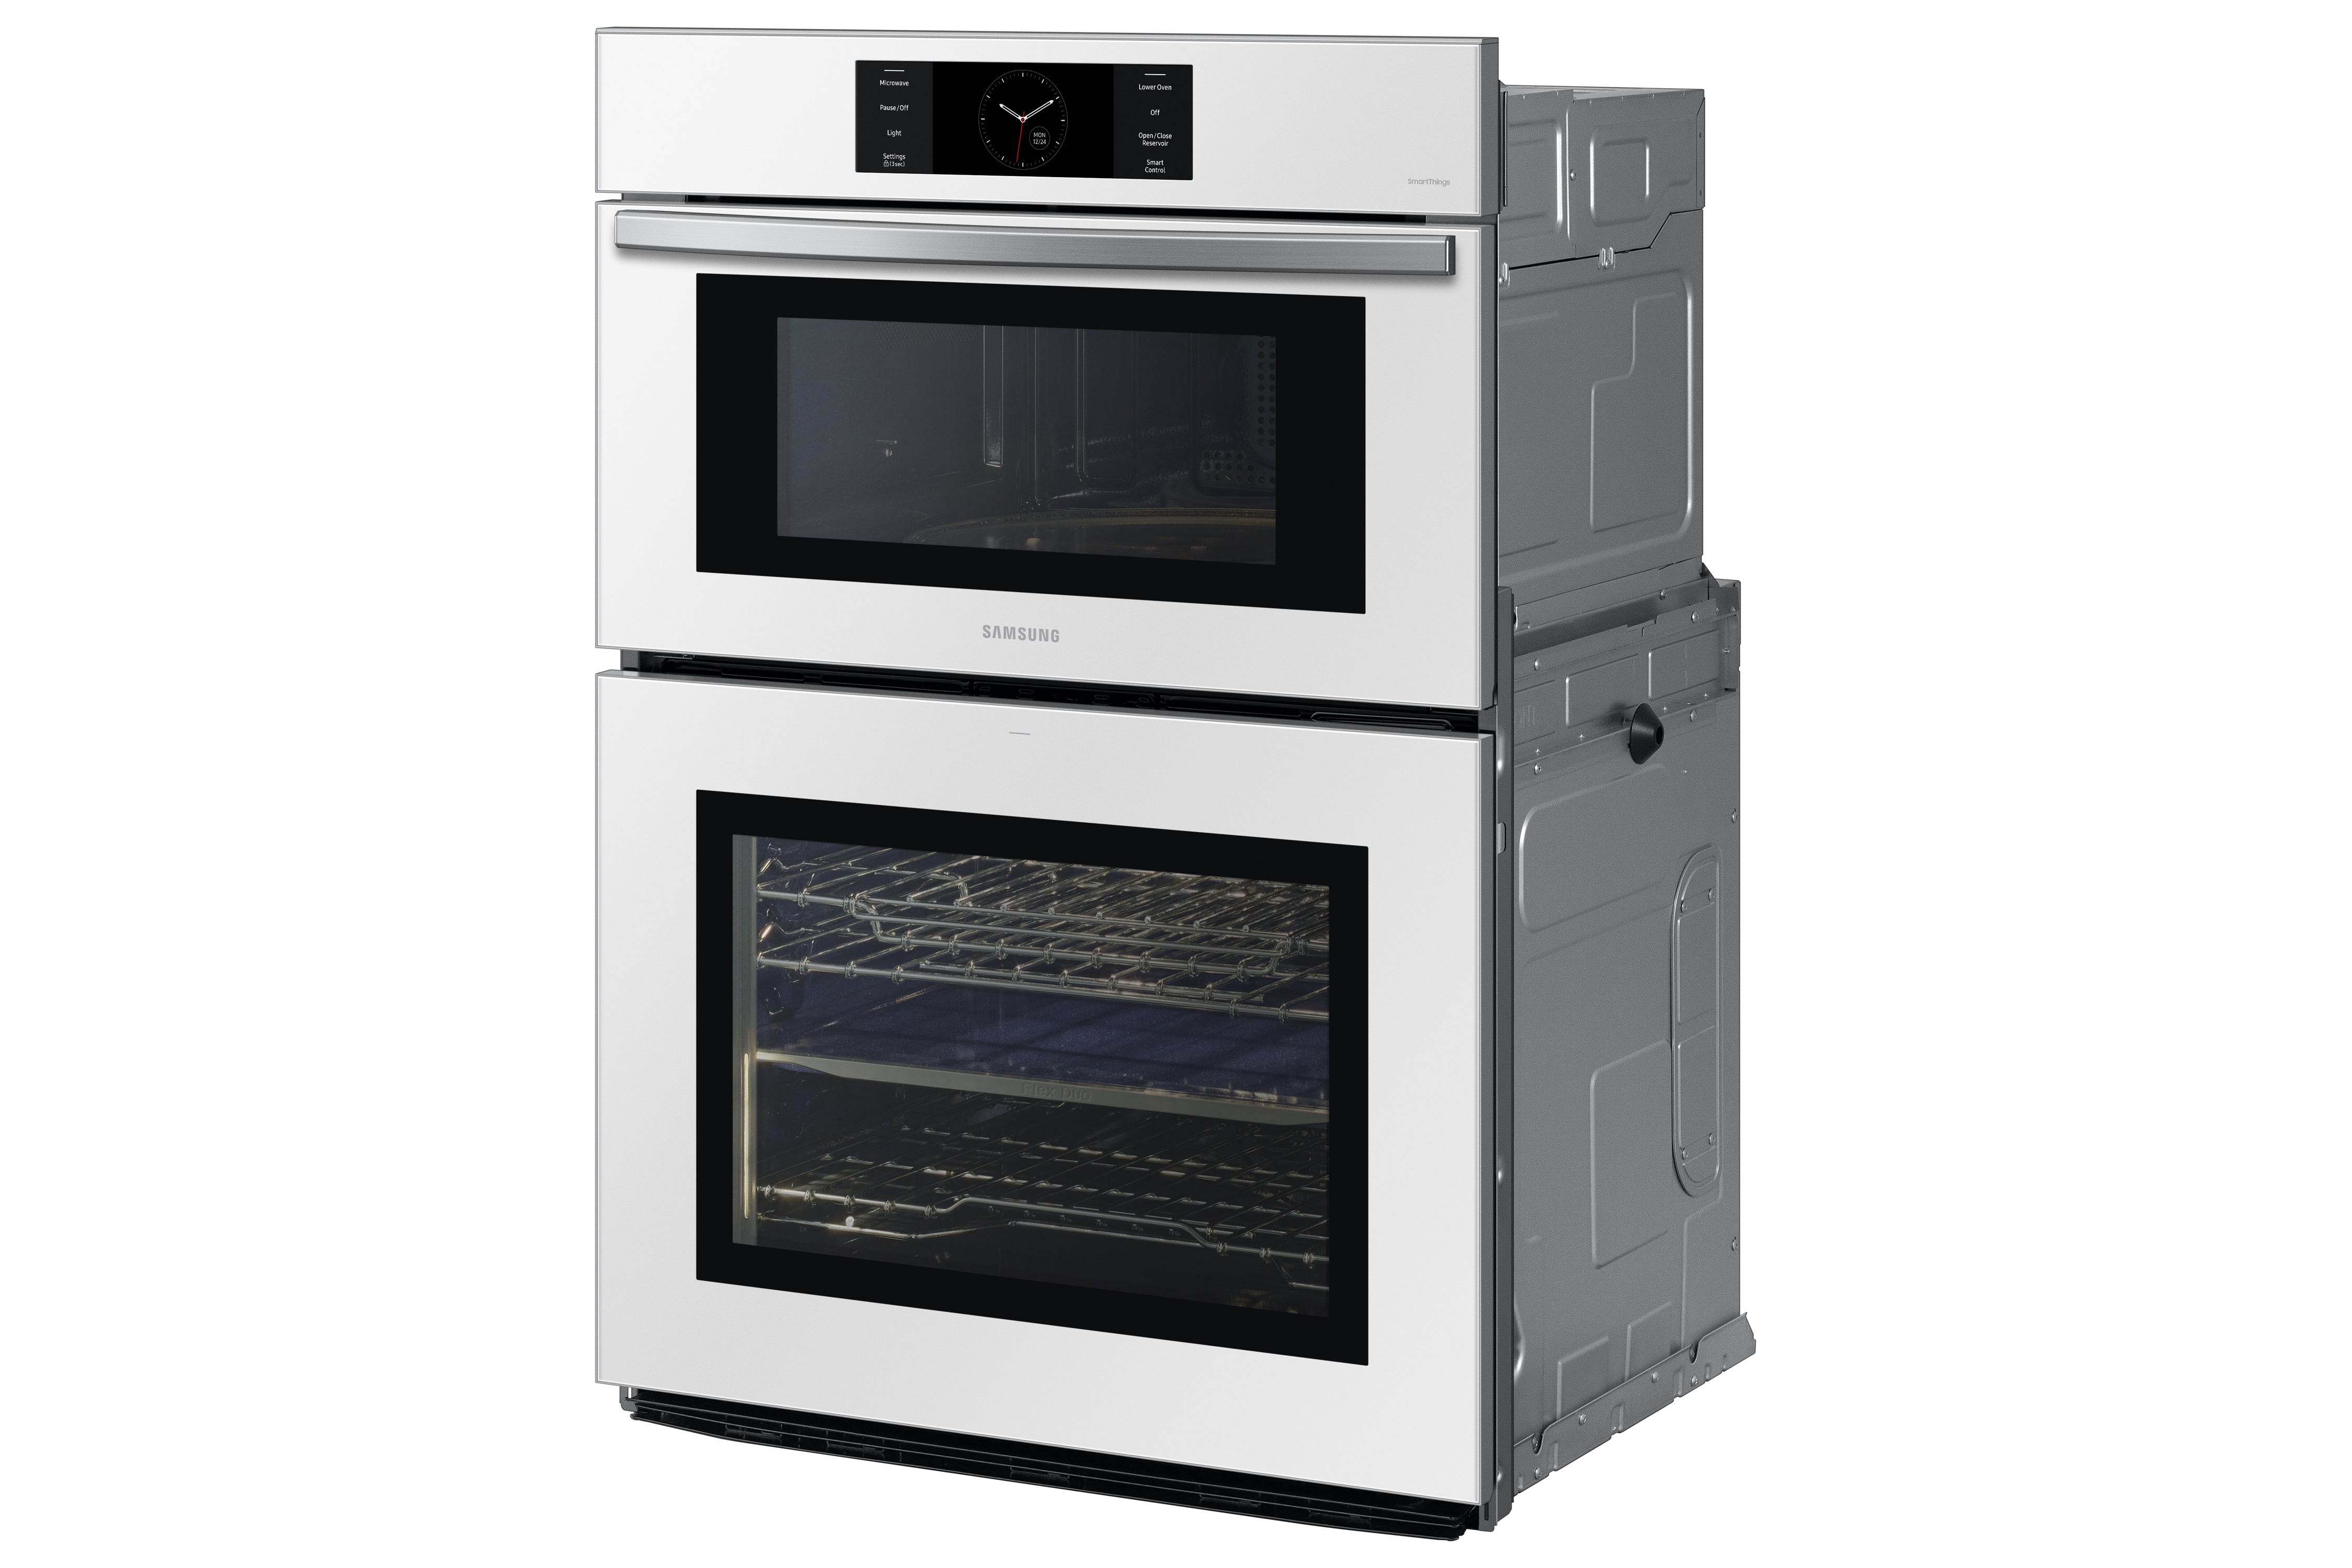 Samsung - 5.1 cu. ft Combination Wall Oven in White - NQ70CB700D12AA